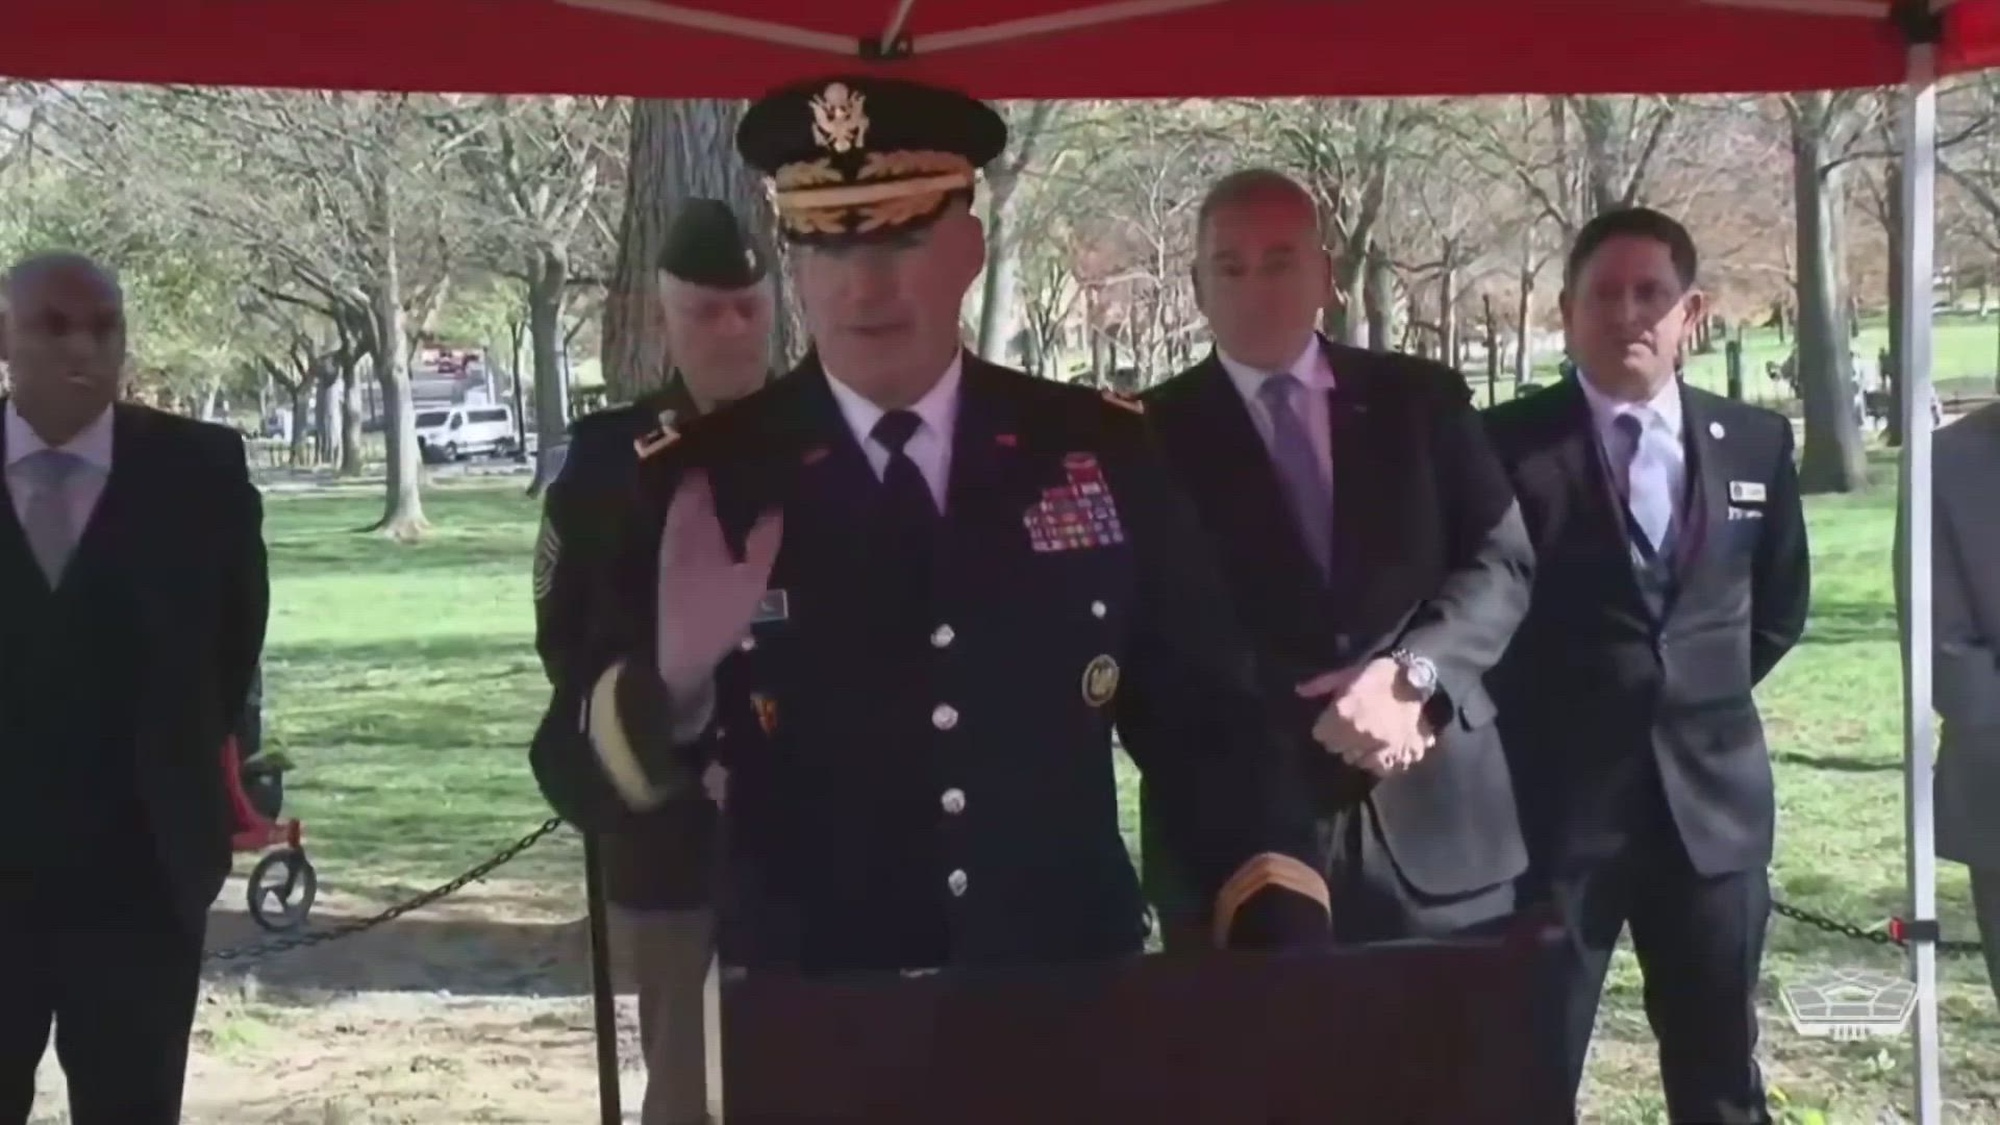 A service member speaks at a lectern outdoors as other officials stand nearby. 